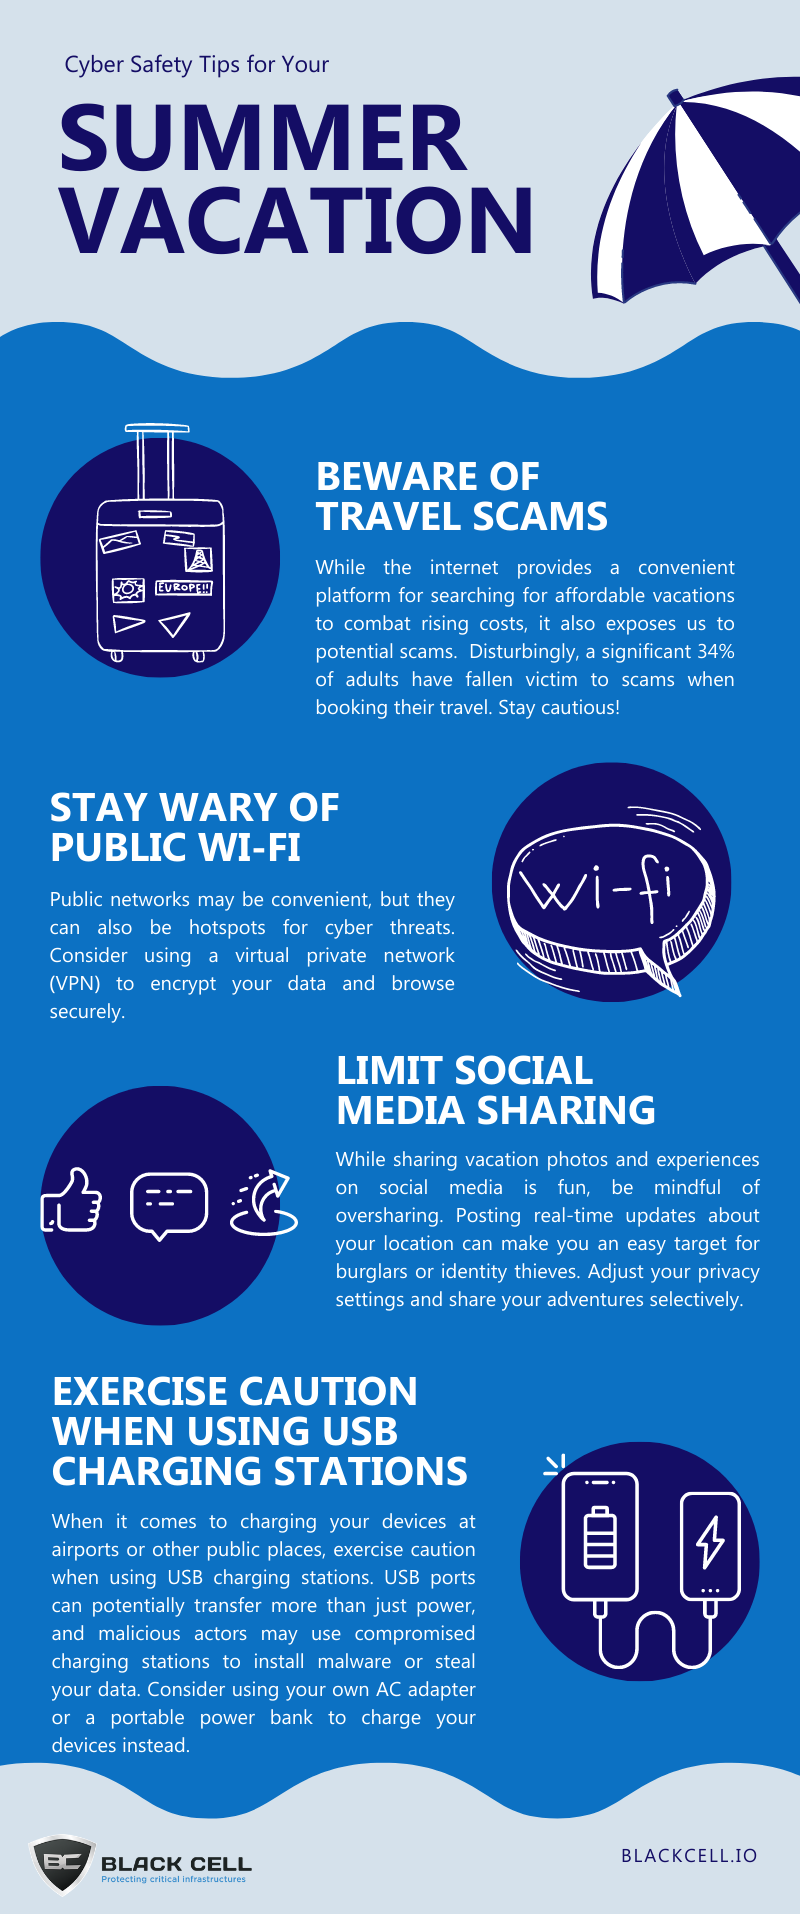 Cybersecurity Safety Tips for Your Summer Vacation Infographic